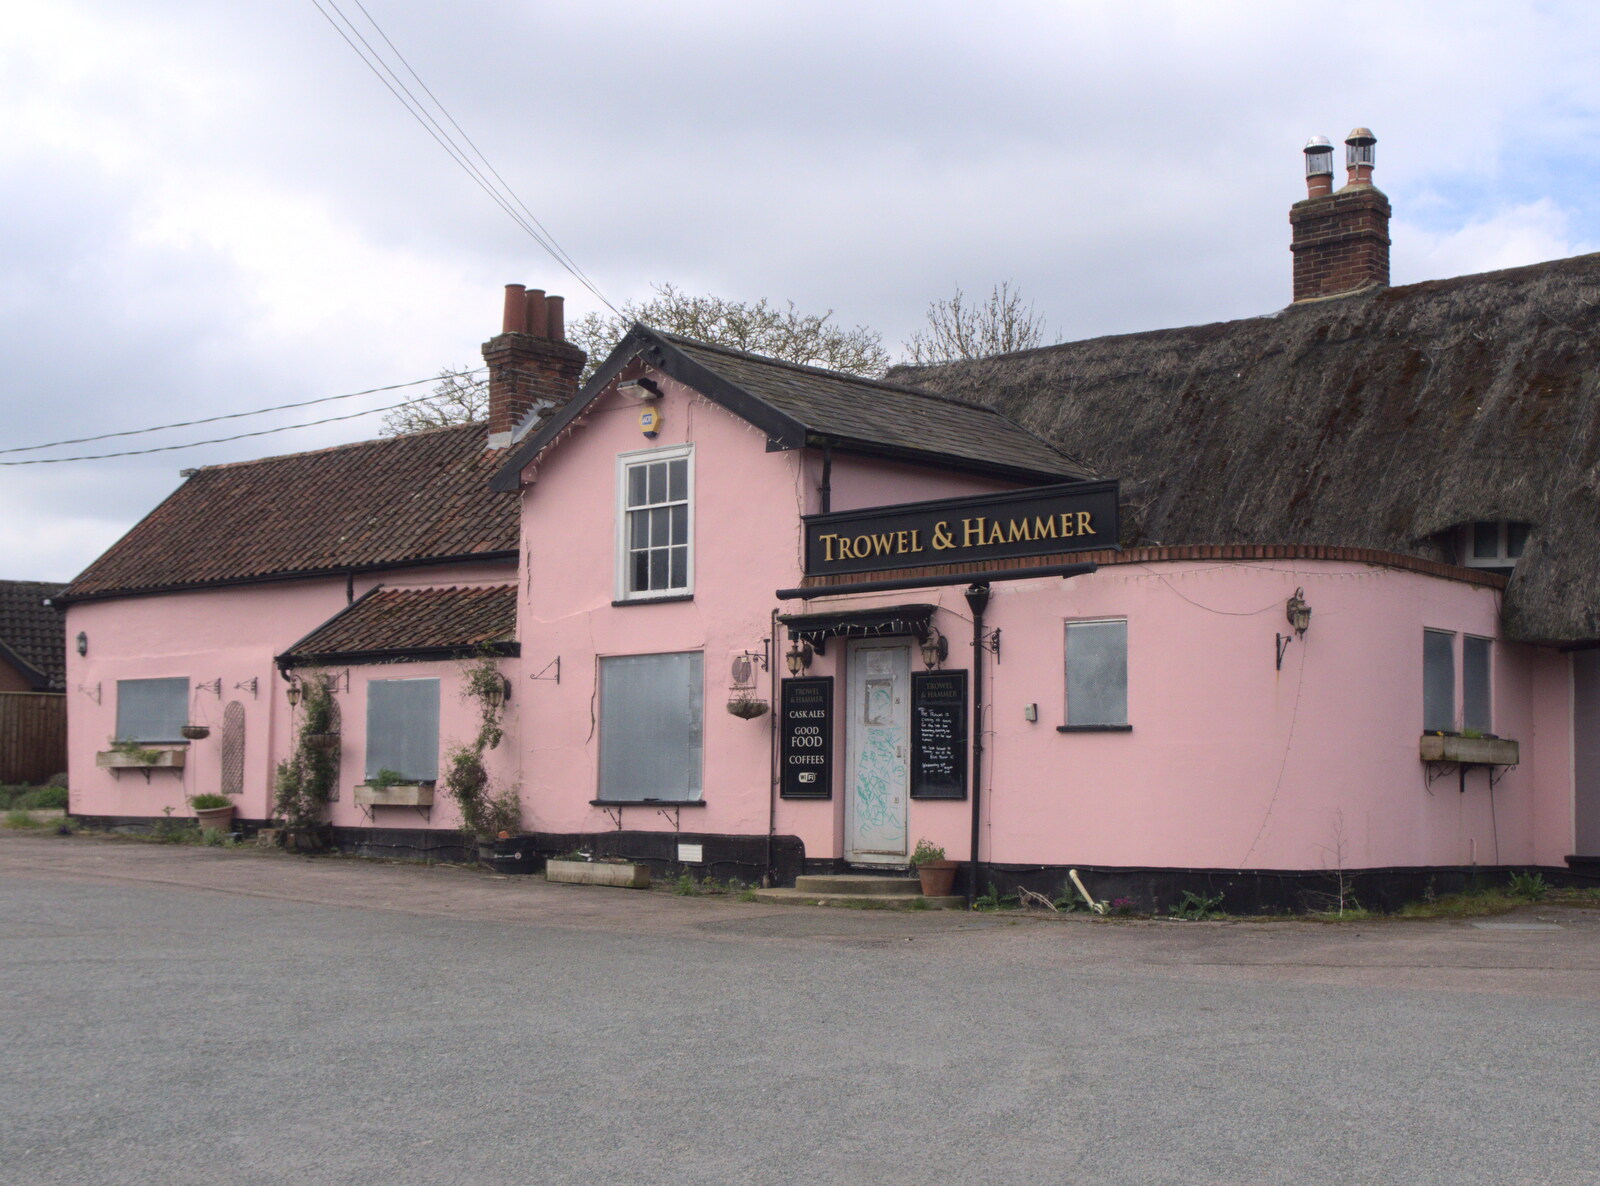 The boarded-up Trowel and Hammer pub from Bike Rides and a Visit to the Farm Shop, Eye, Suffolk -  25th April 2023